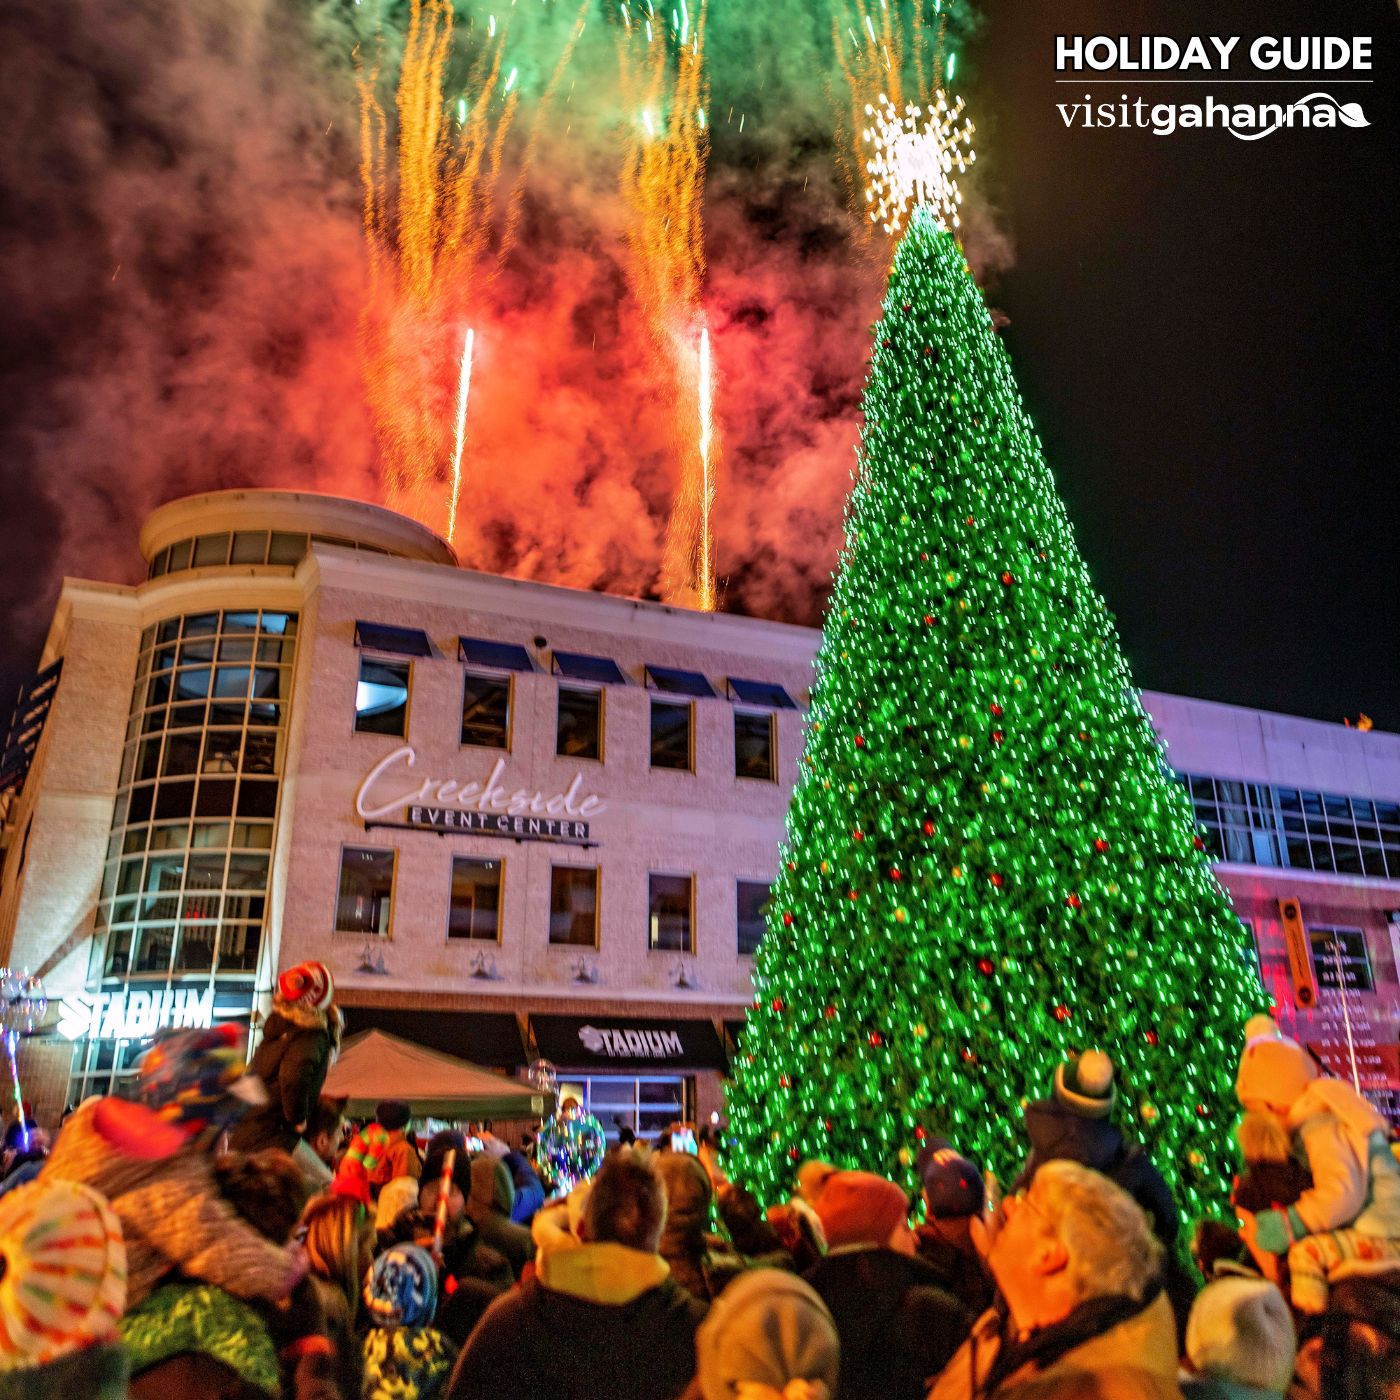 Holiday Guide: Get into the Holiday Spirit in Gahanna